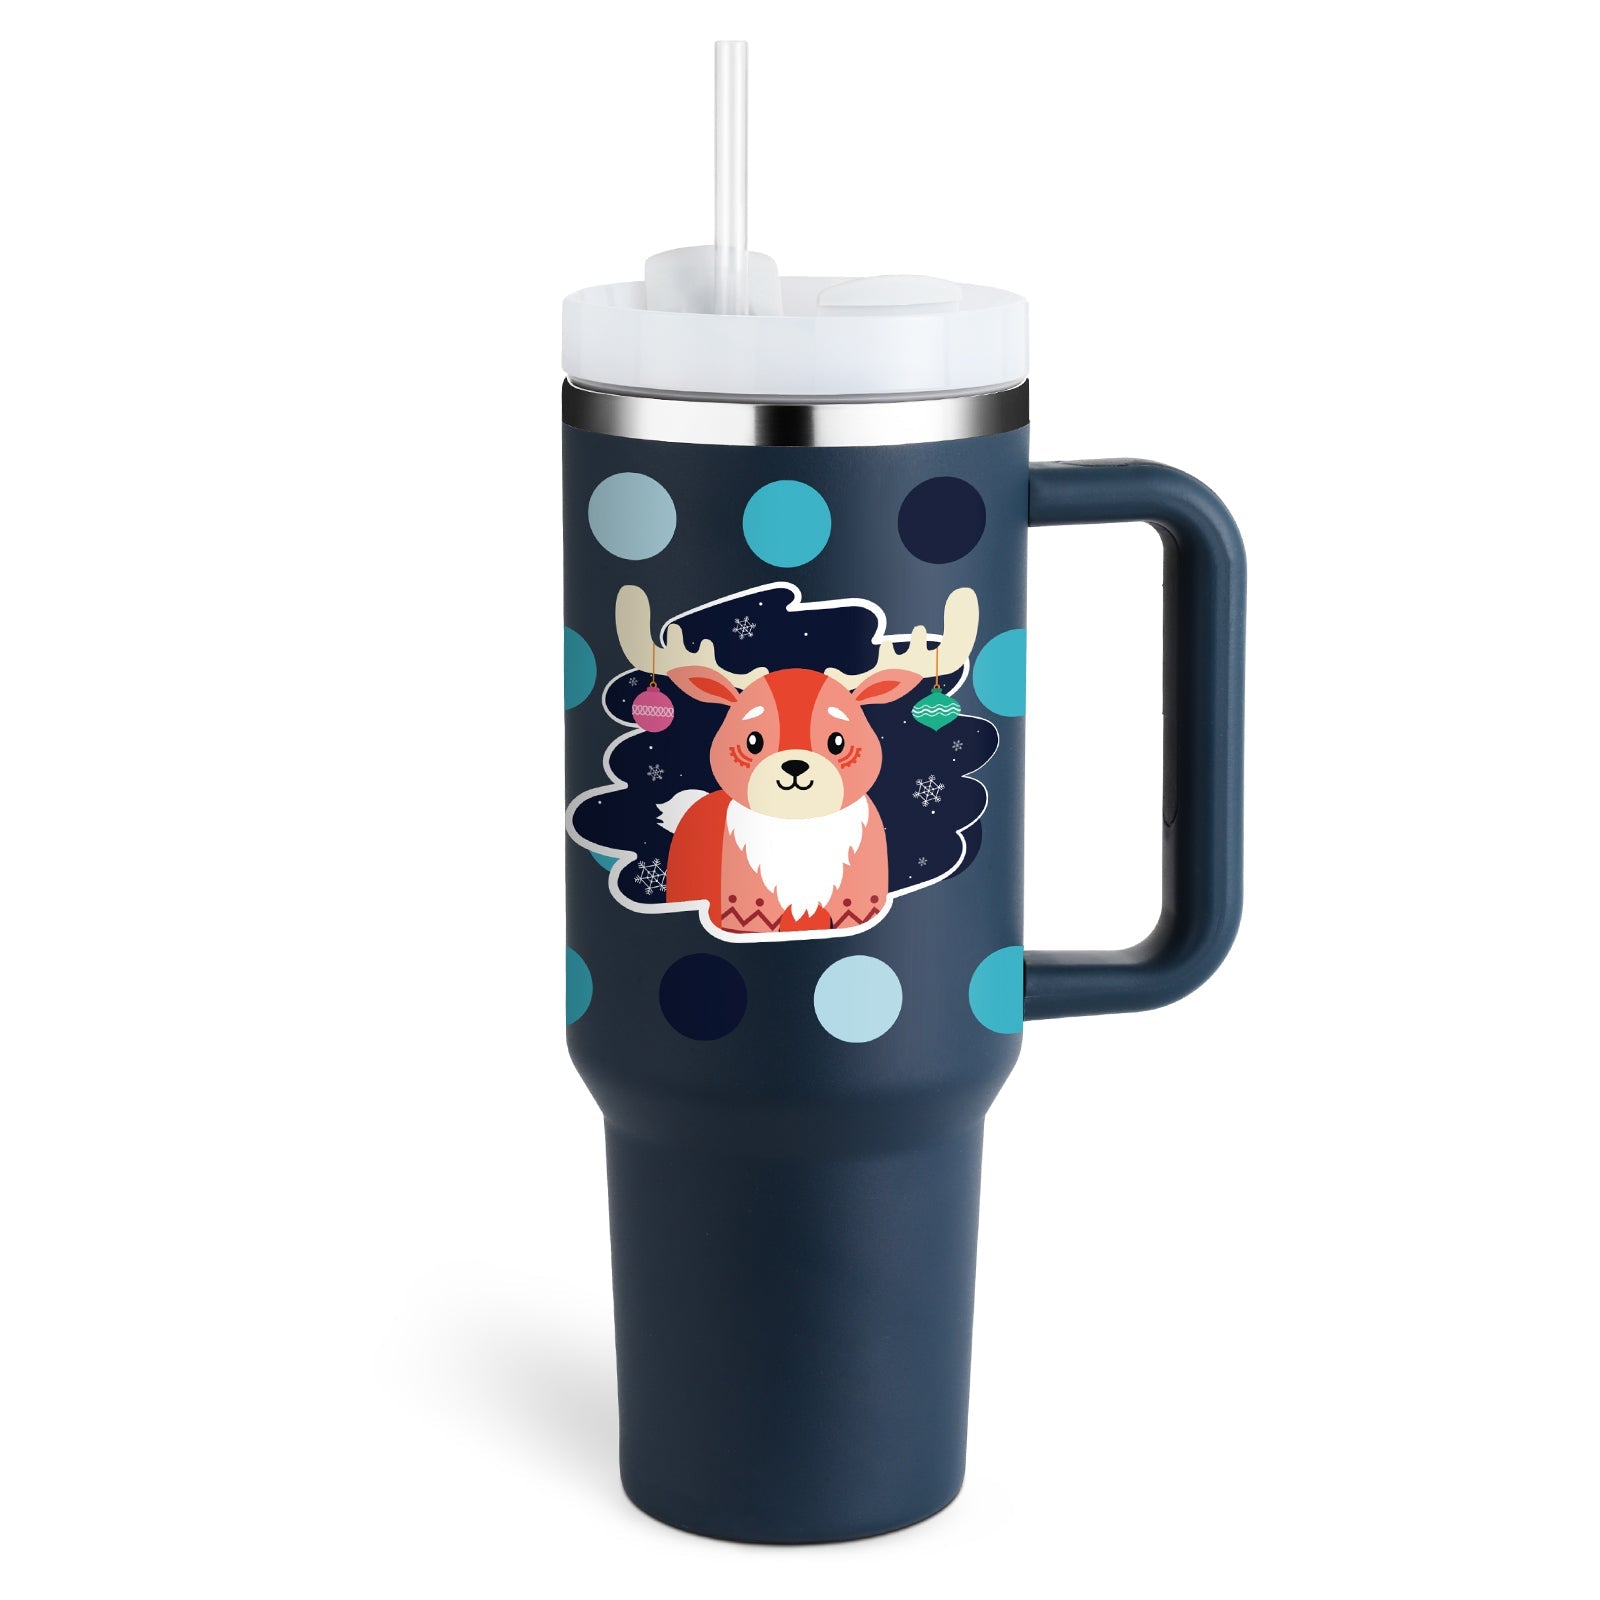 Christmas Thermal Mug 40oz Straw Coffee Insulation Cup With Handle Portable Car Stainless Steel Water Bottle LargeCapacity Travel BPA Free Thermal Mug - Trendylis